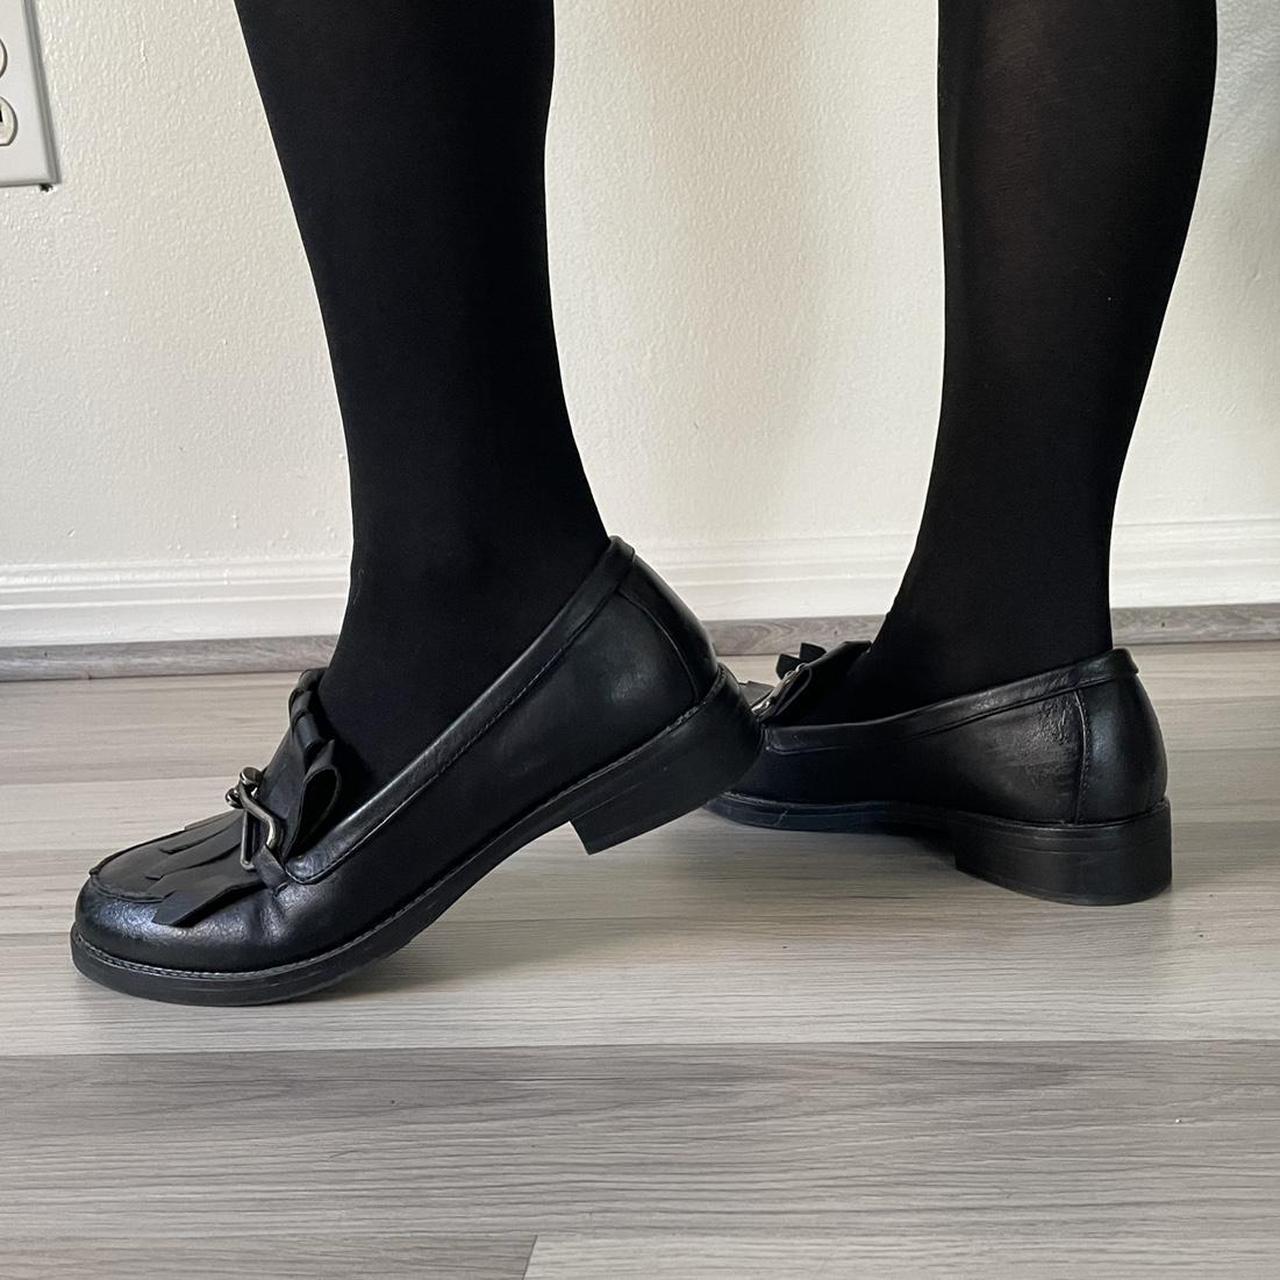 Product Image 4 - Dark acadamia loafers 🕷

Black loafer